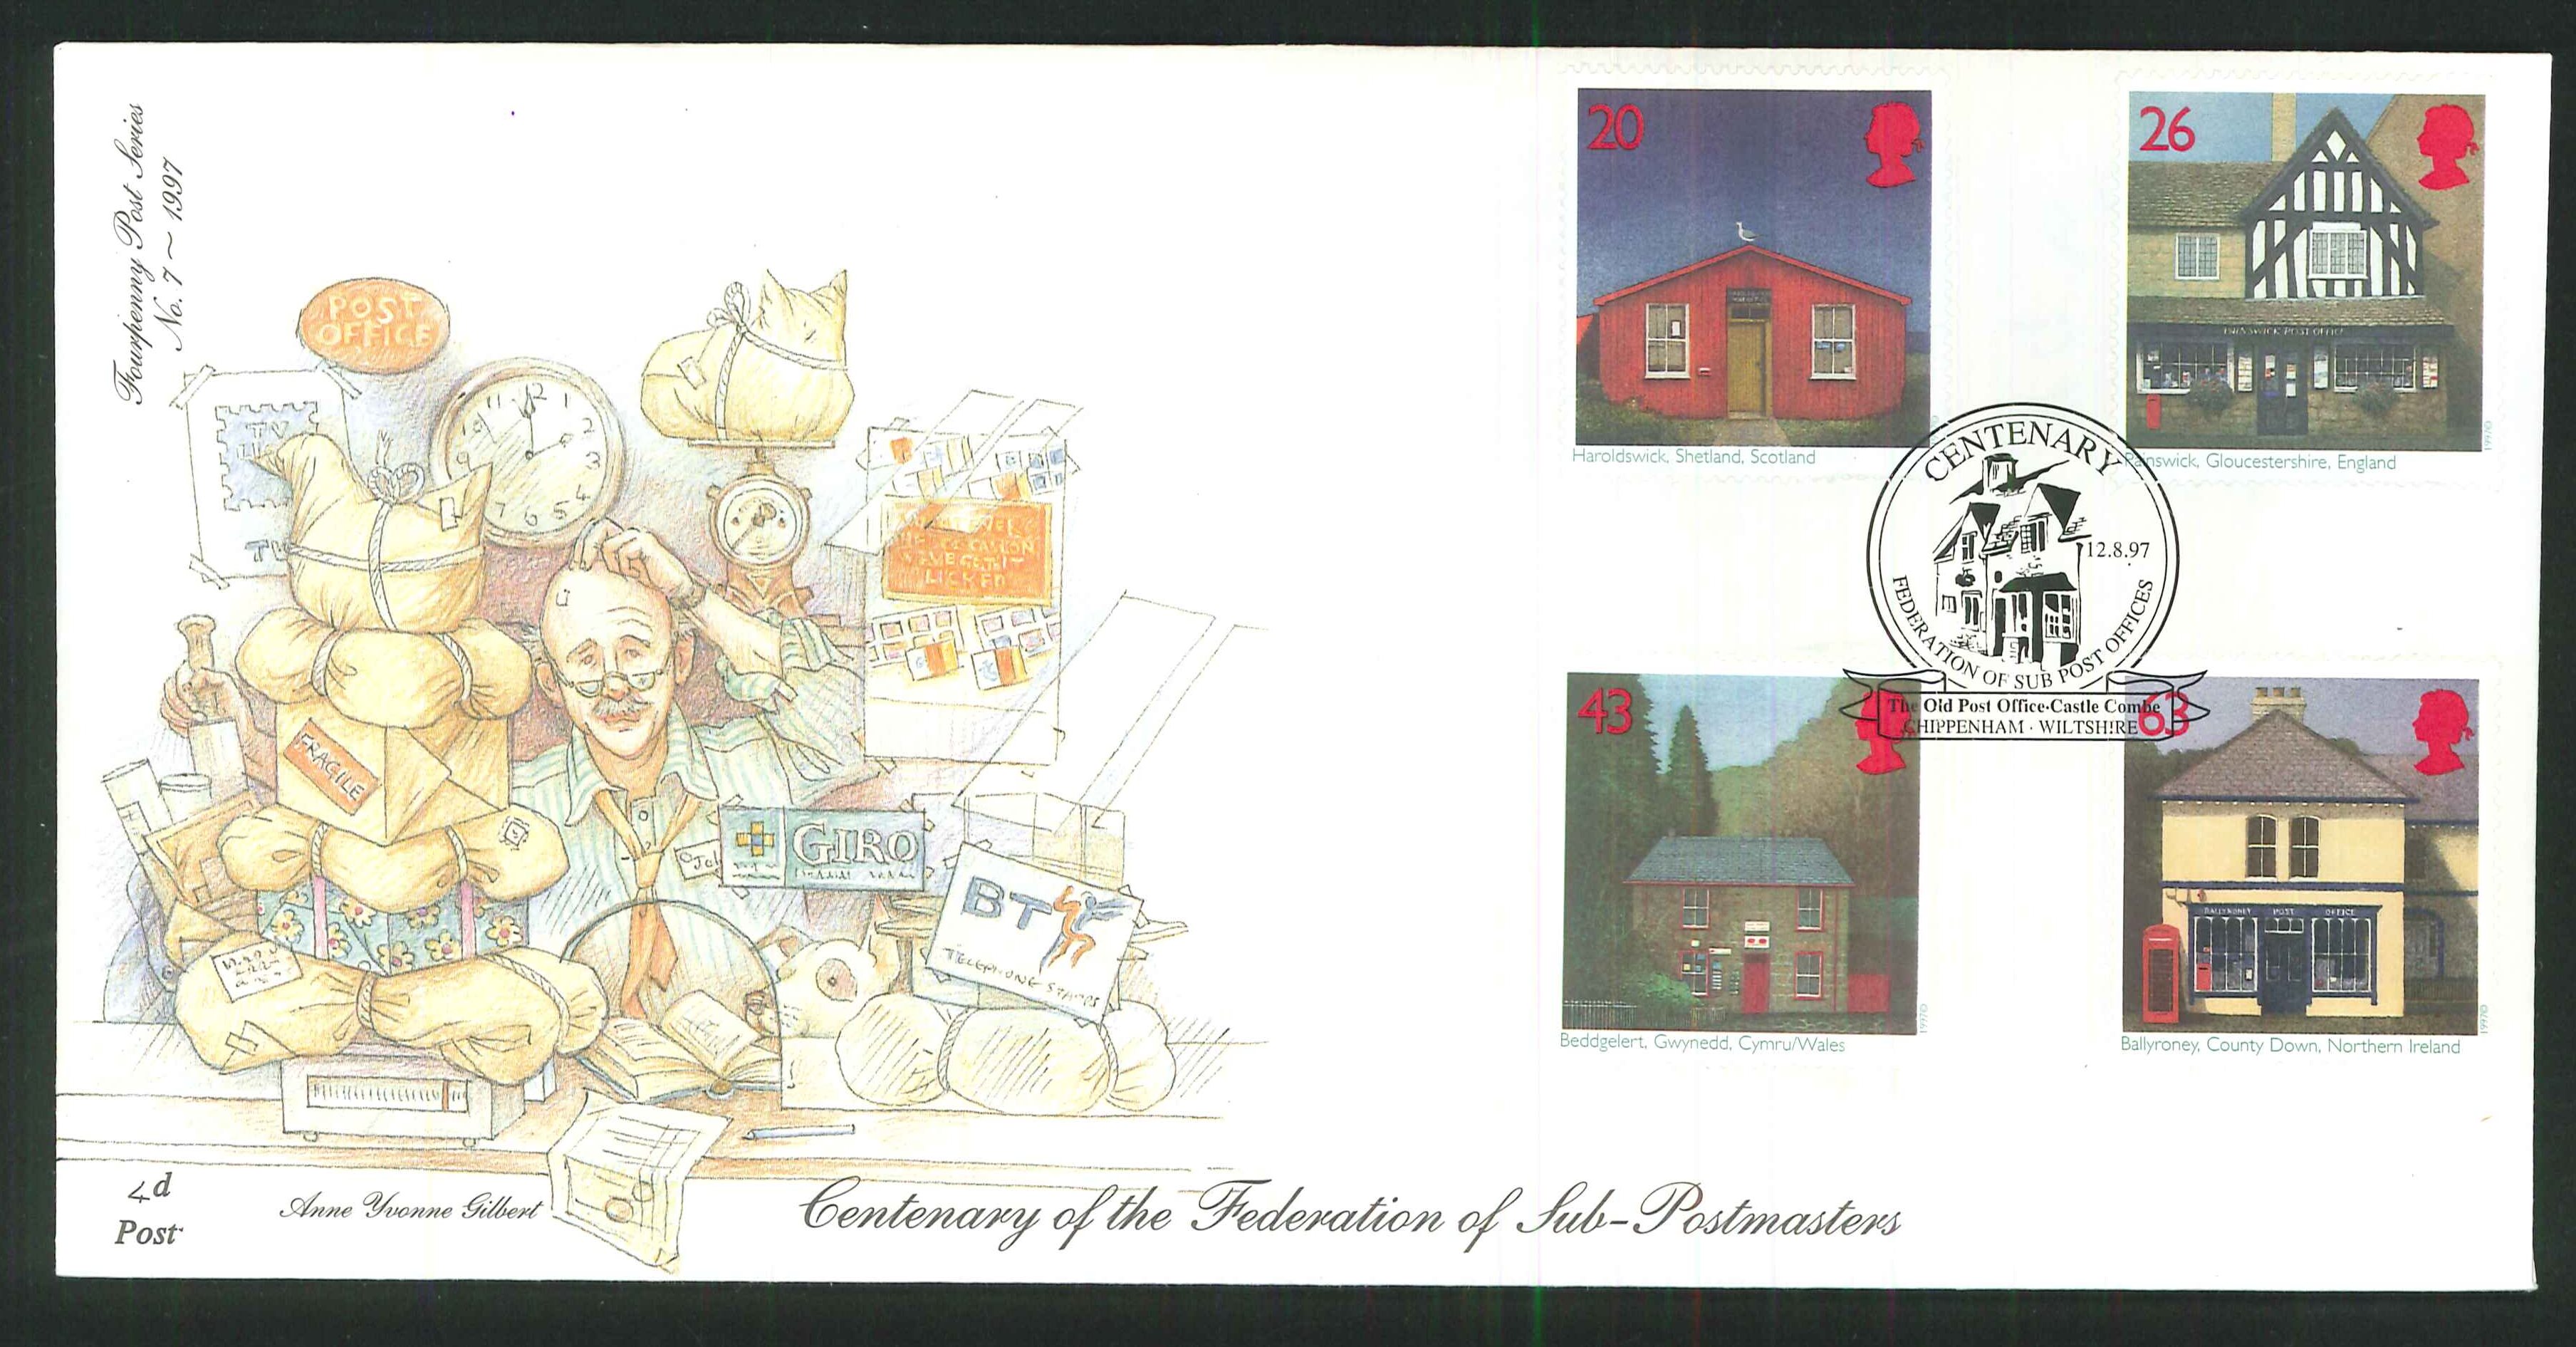 1997 - Centenary of the Federation of Sub Postmasters, Old Post Office, Castle Coombe Postmark - Click Image to Close